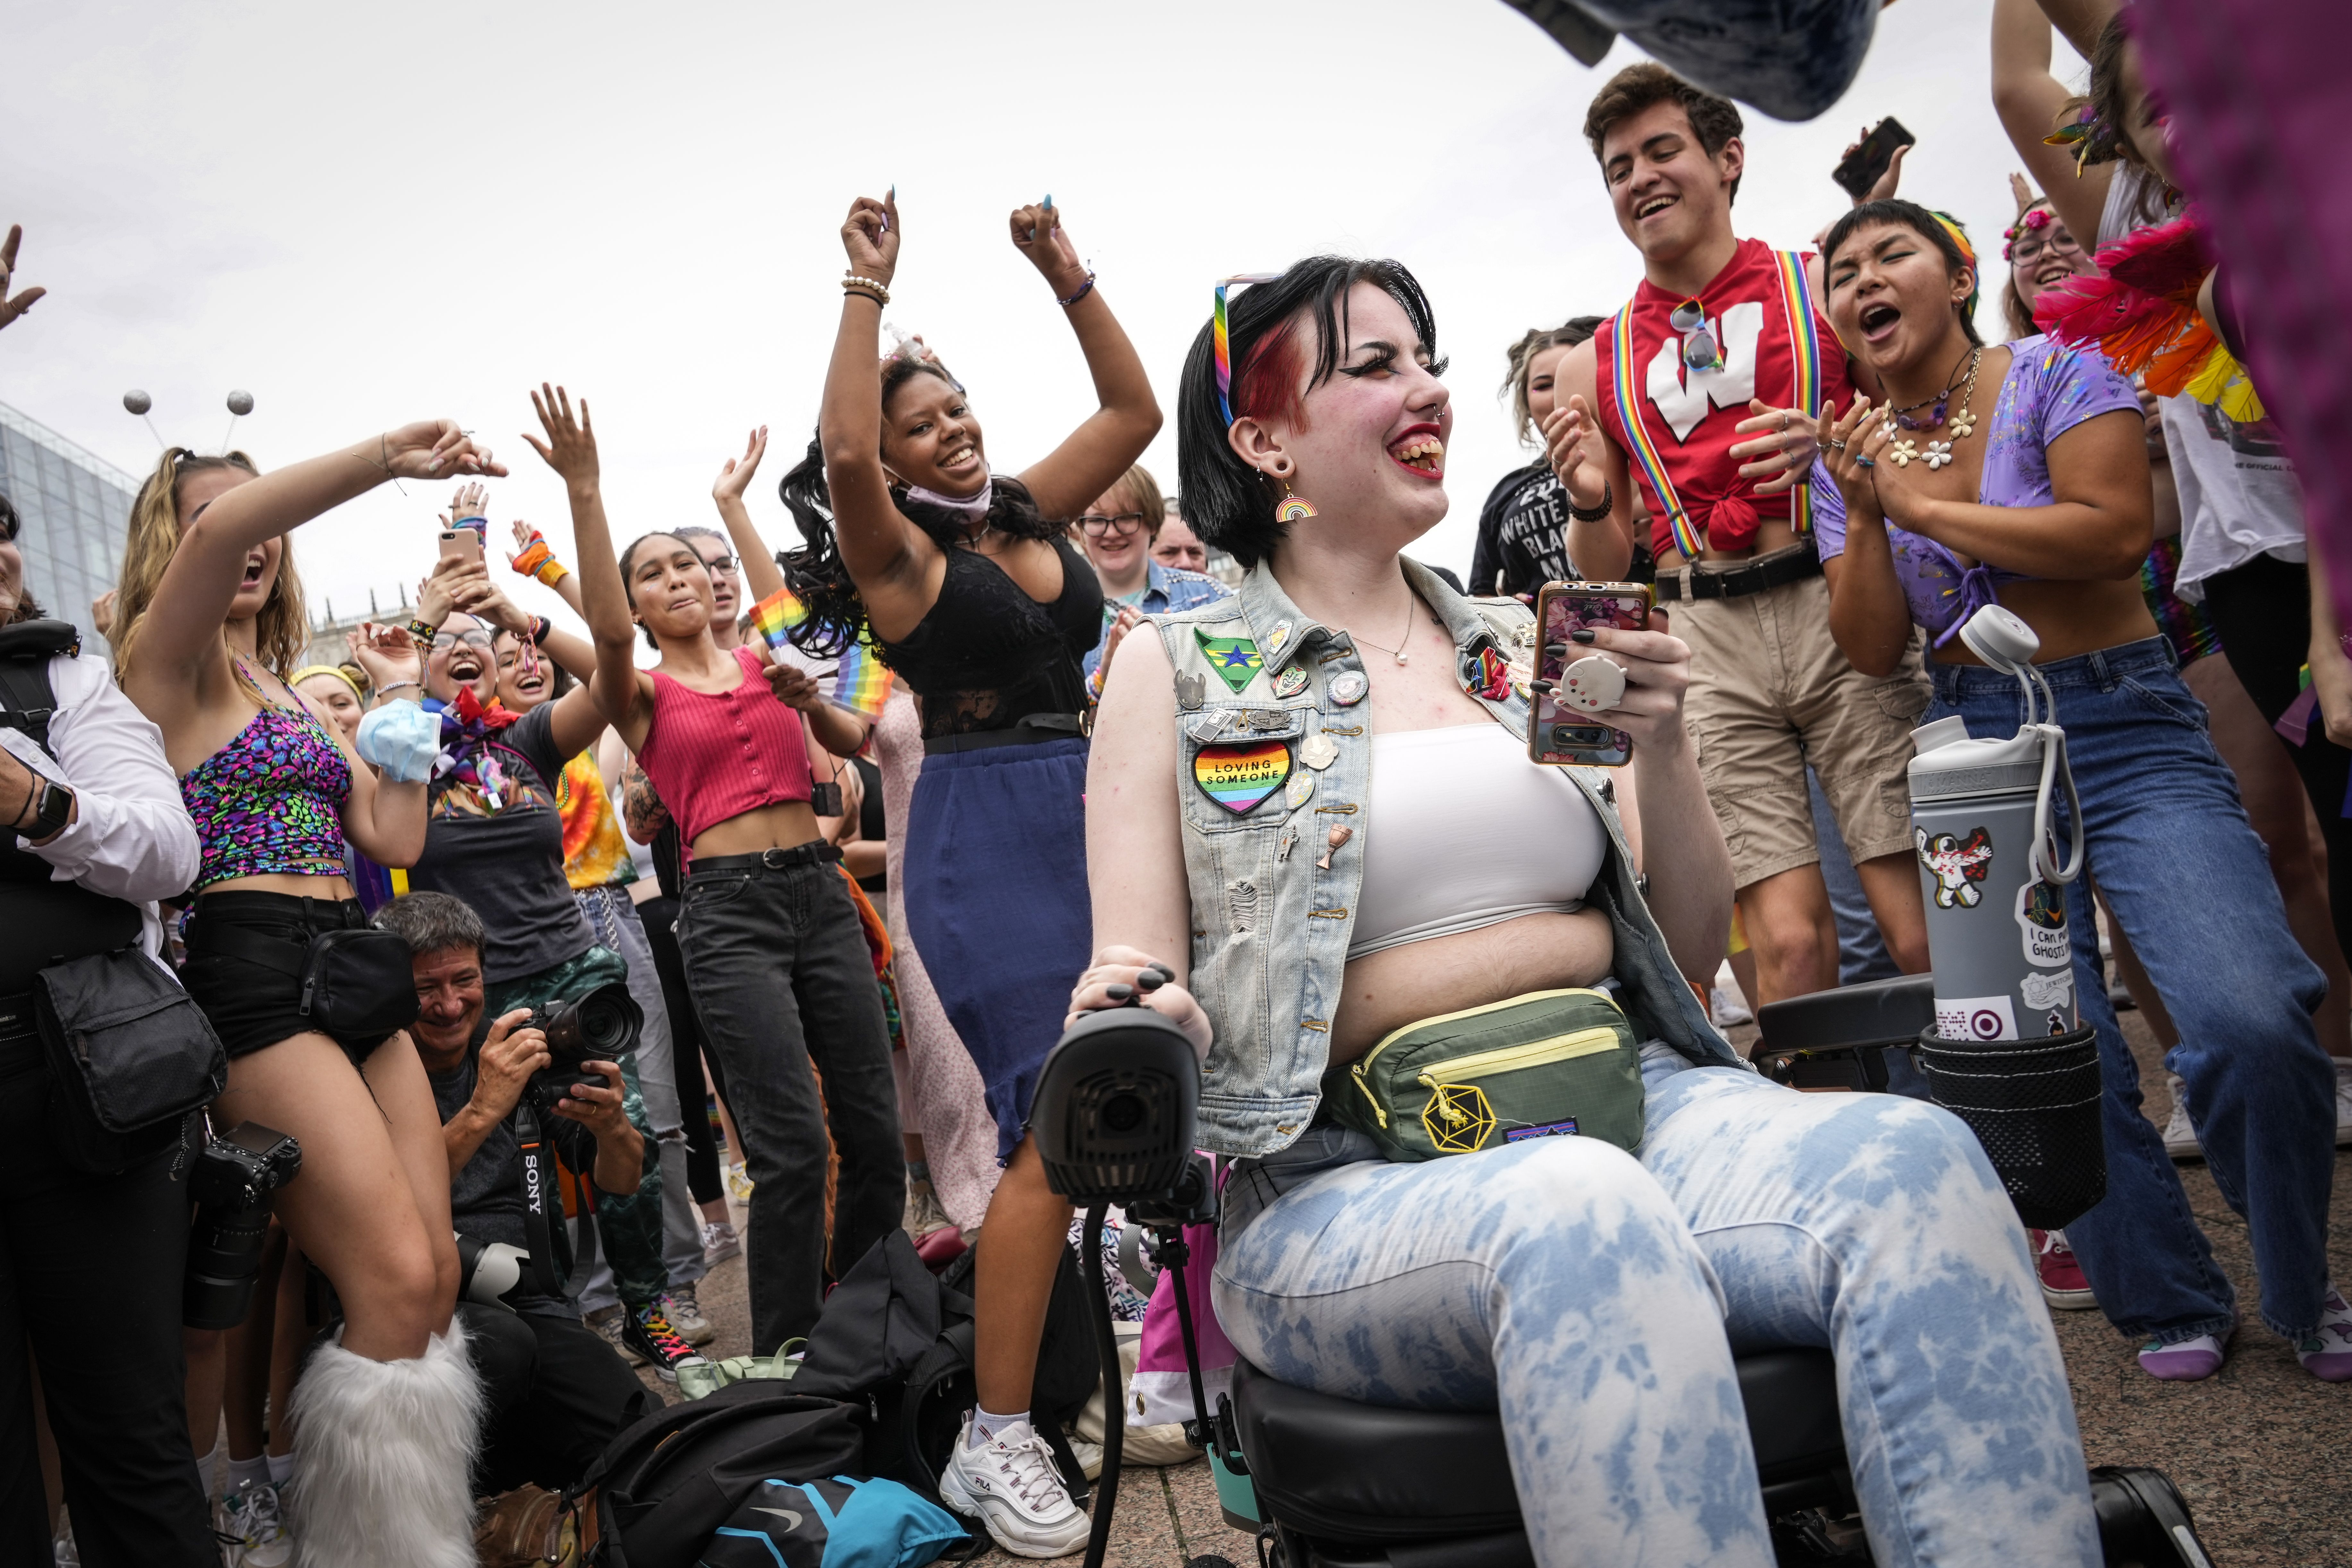 Photo of a person in a power wheelchair smiling as people around them cheer